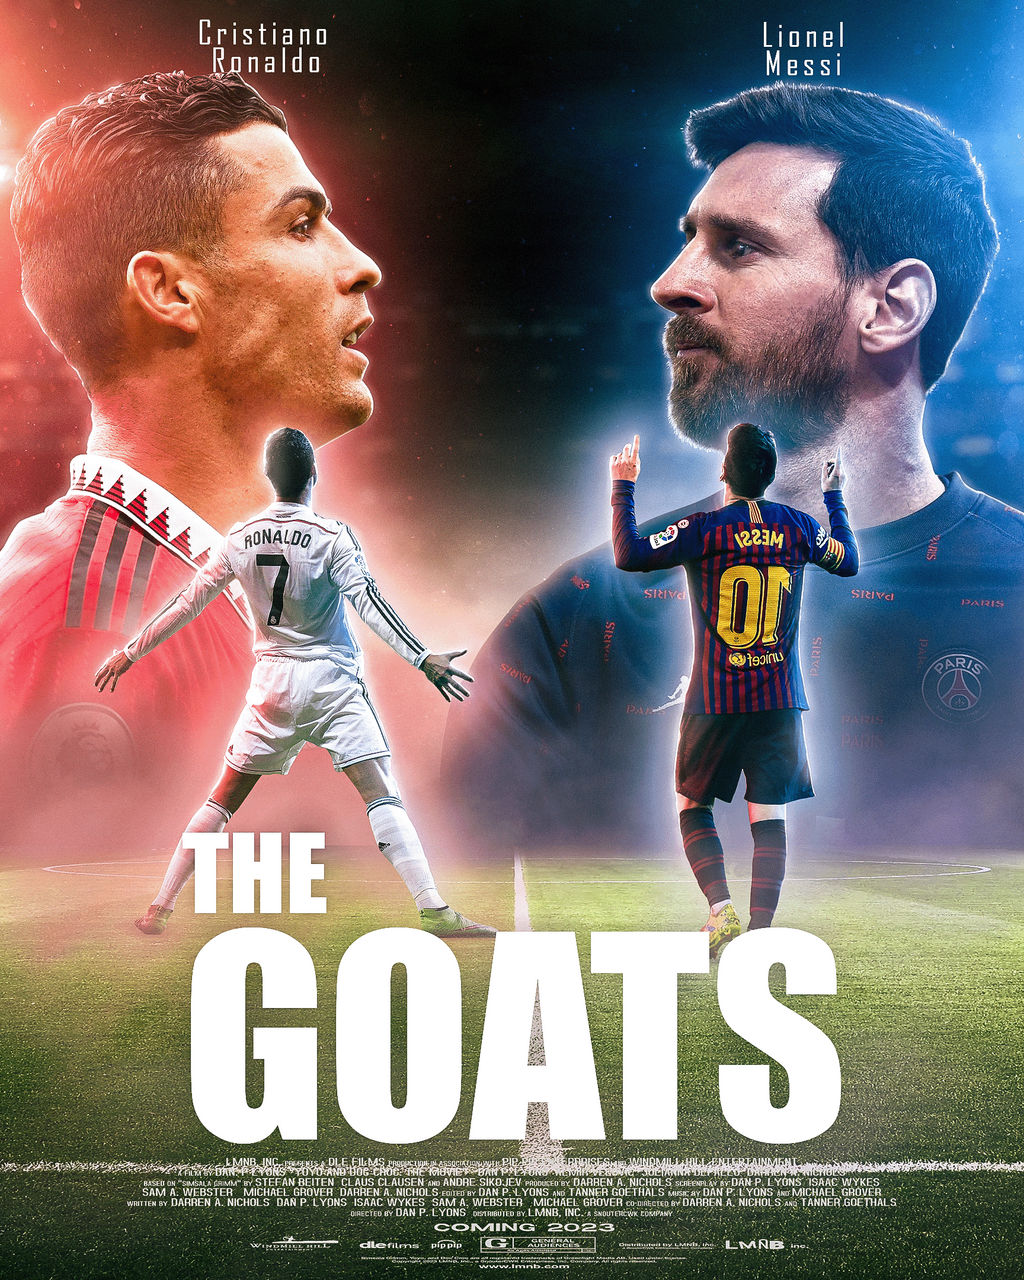 Cristiano Ronaldo and Lionel Messi Poster The Great Football Star Soccer  Player